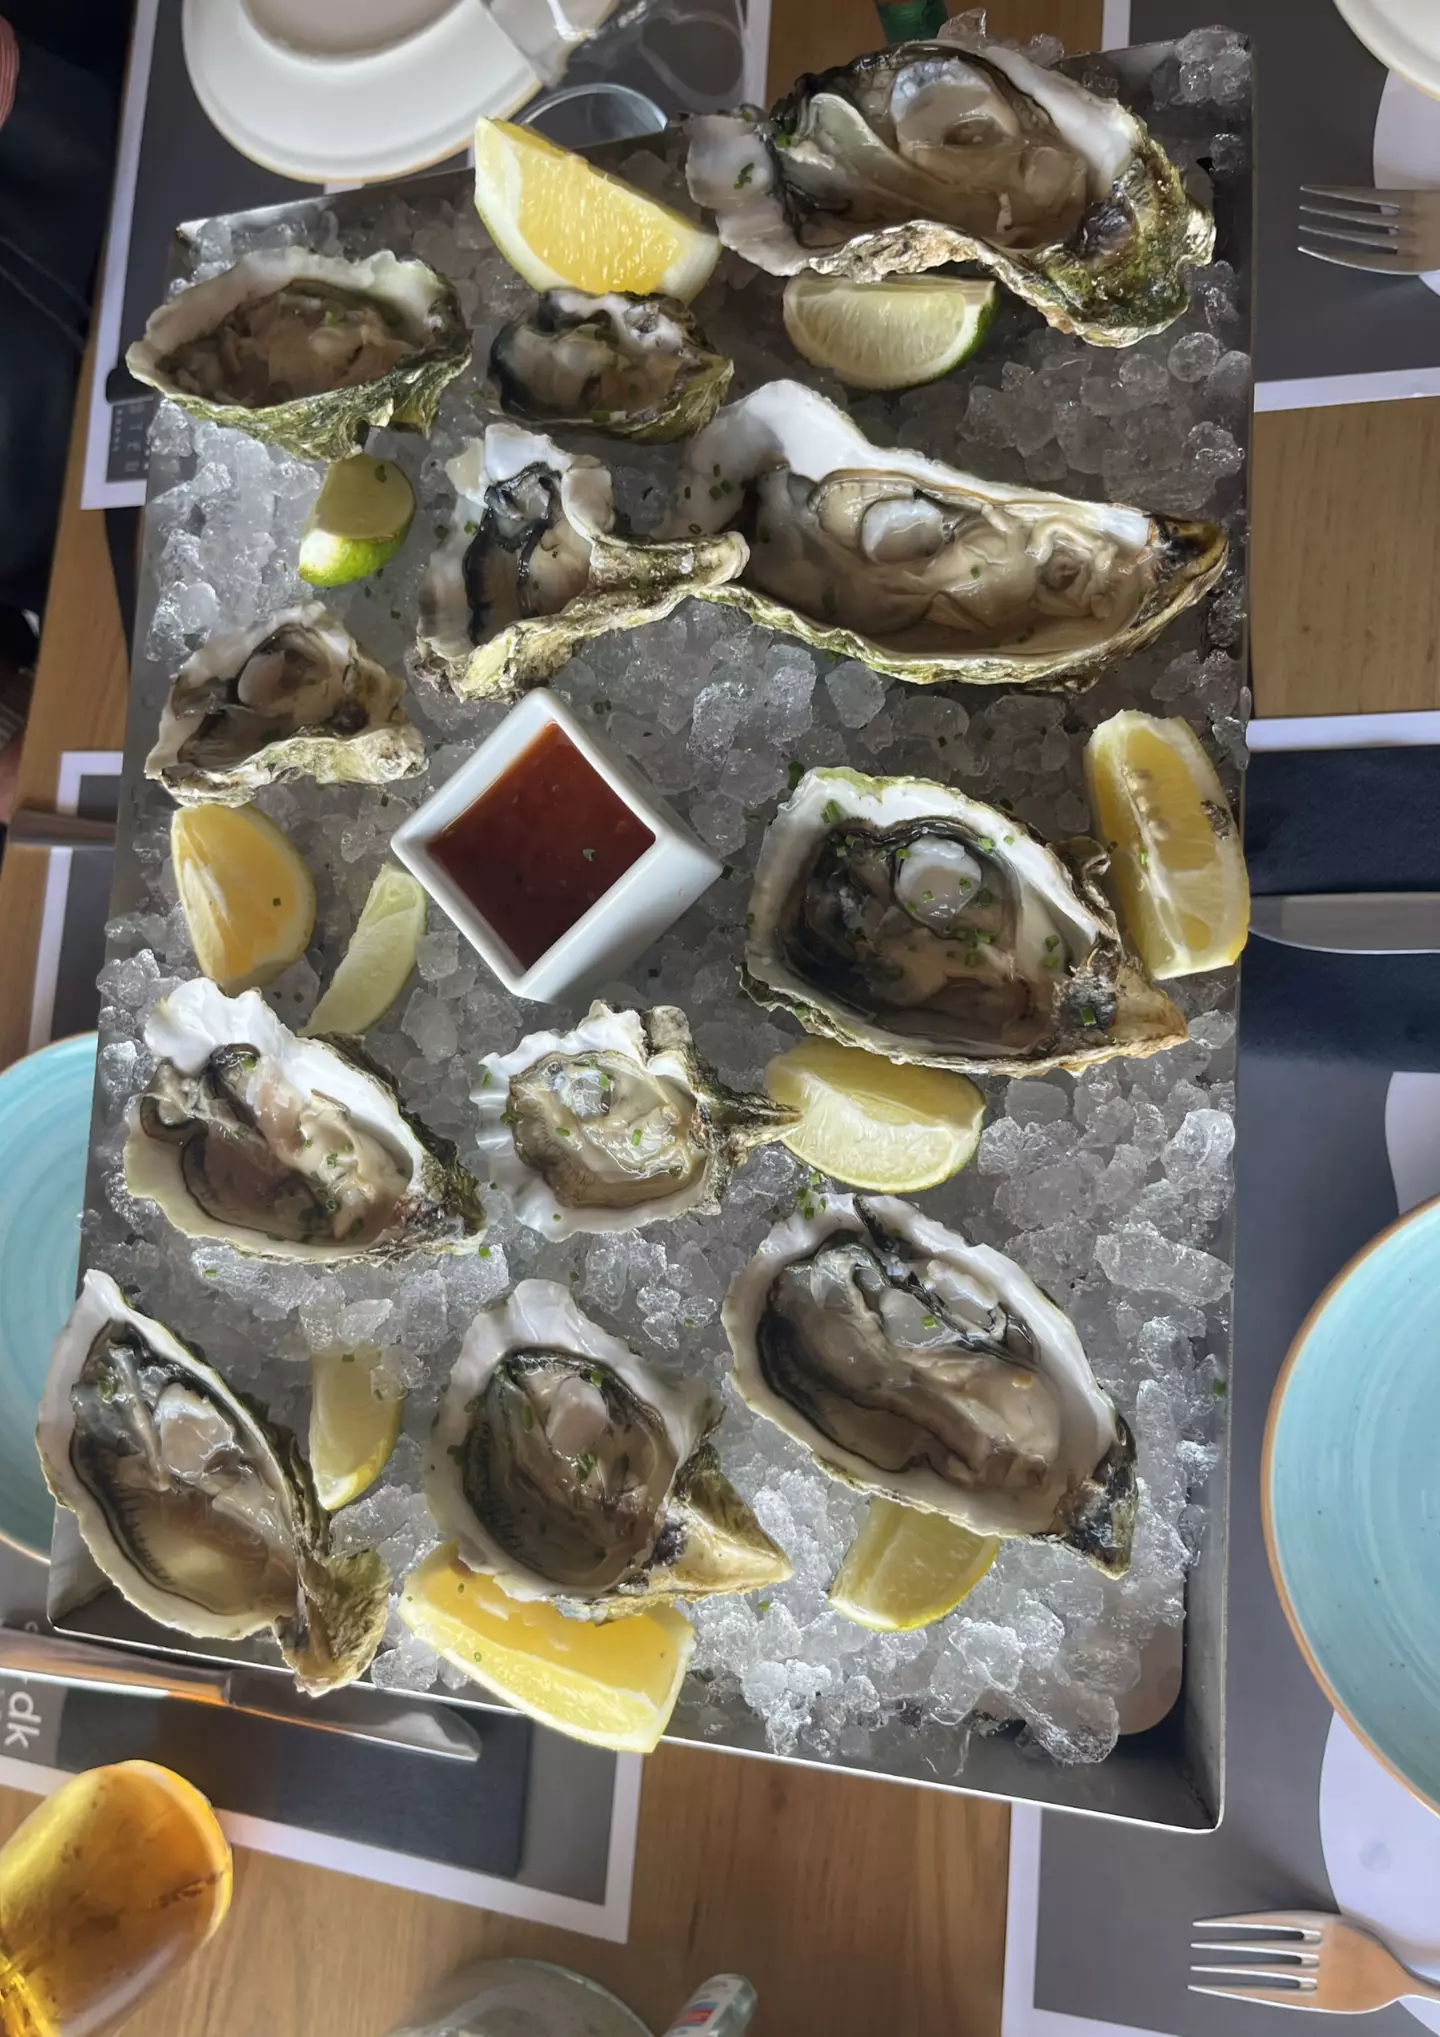 The couple were charged €30 per oyster.